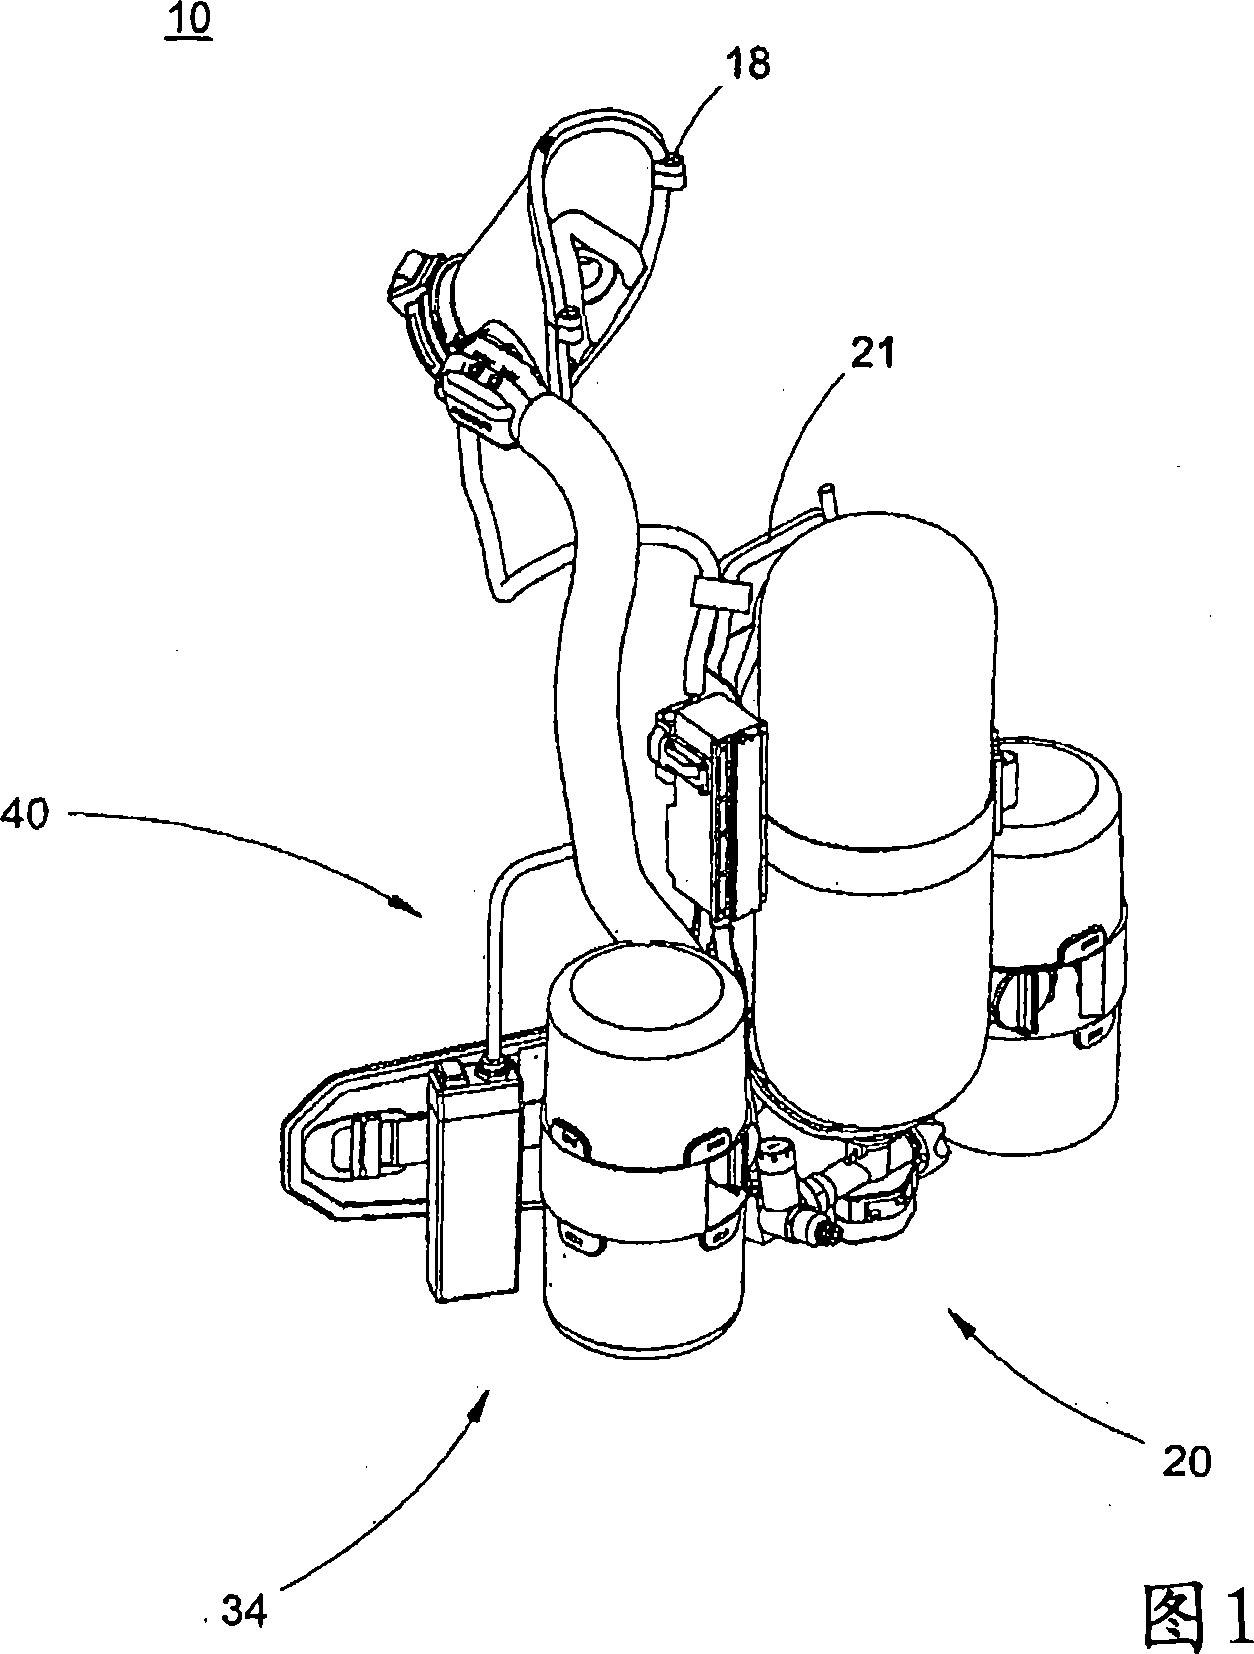 Portable air-purifying system utilizing enclosed filters